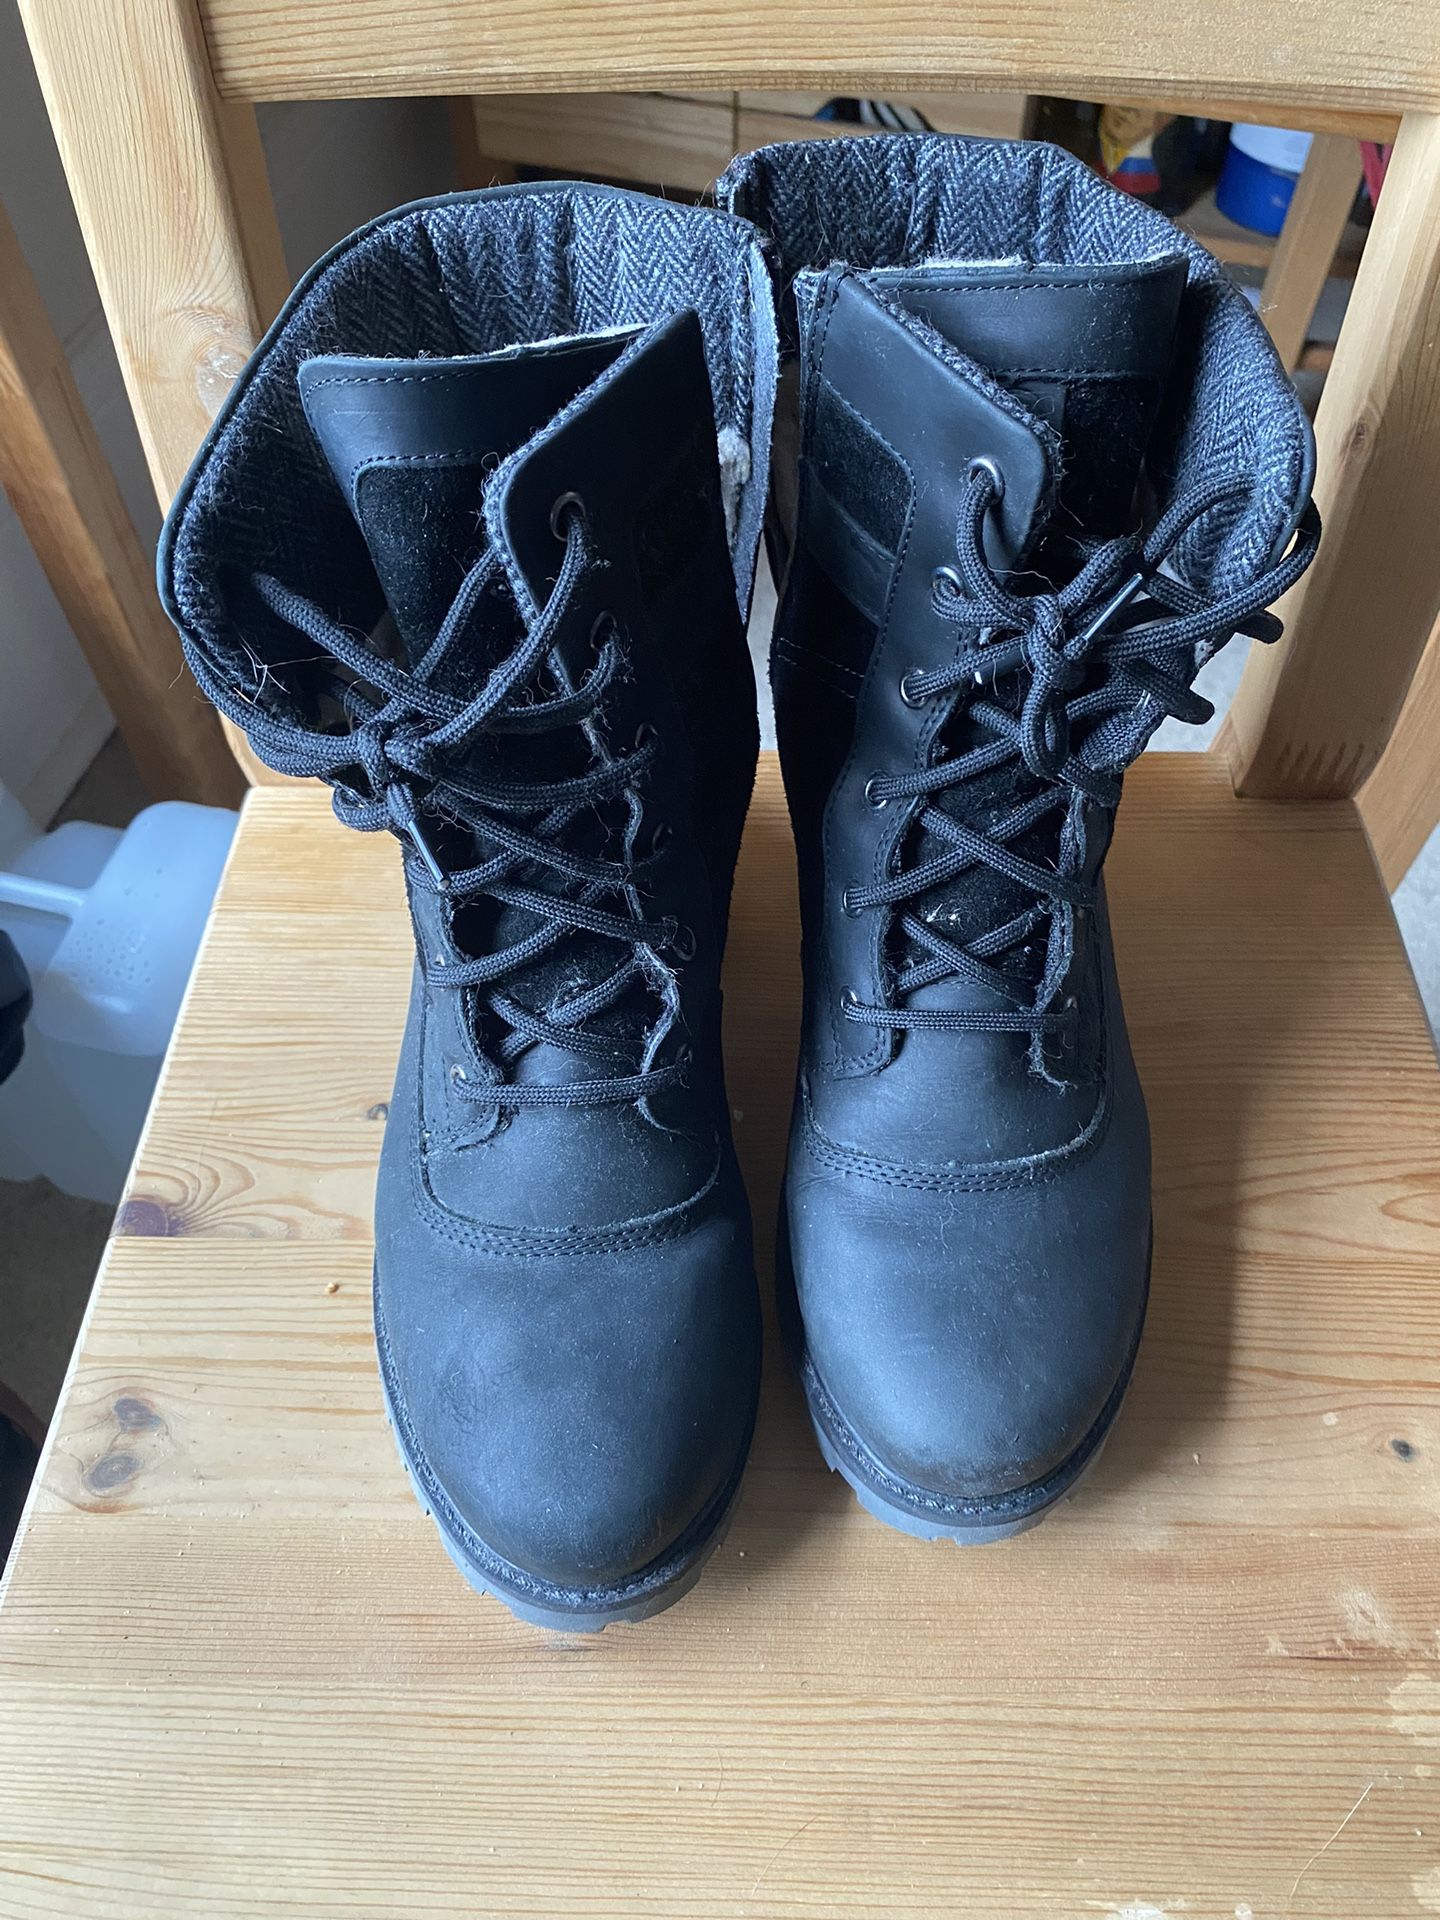 Women’s Size 8 Kamik Rogue Mid Winter Boots. Worn Once